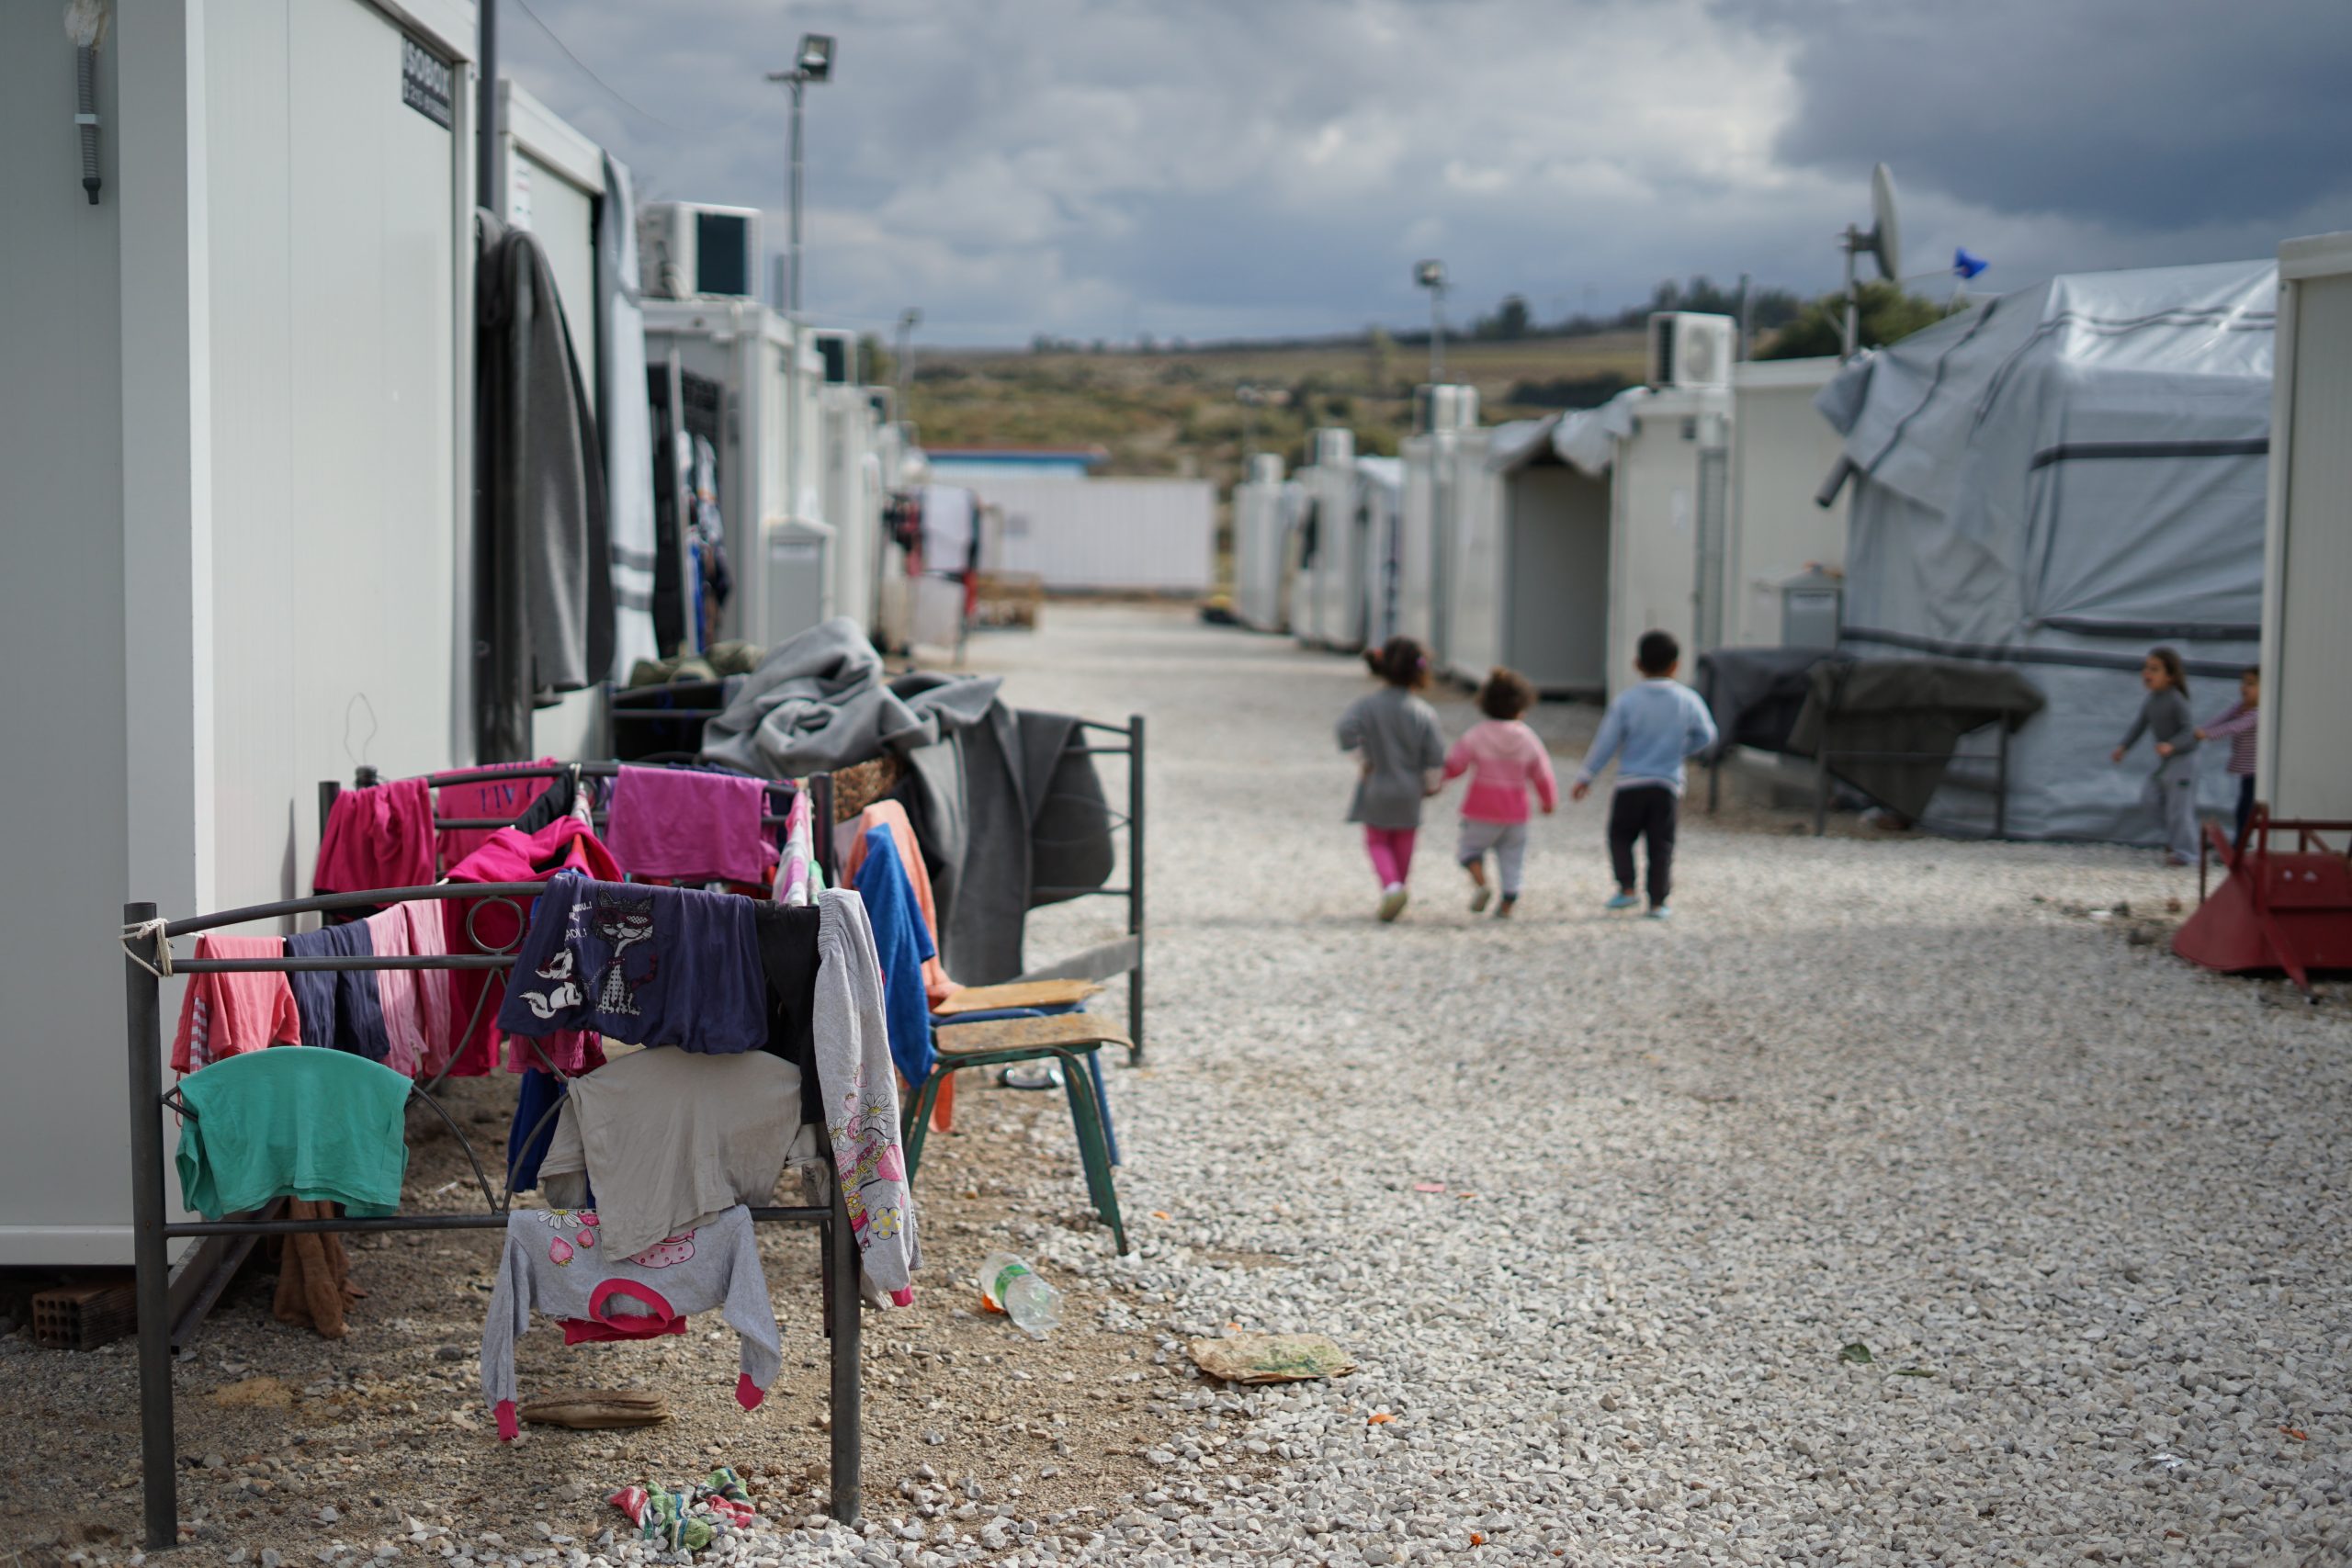 The photo shows a refugee camp with three small children walking in the distance